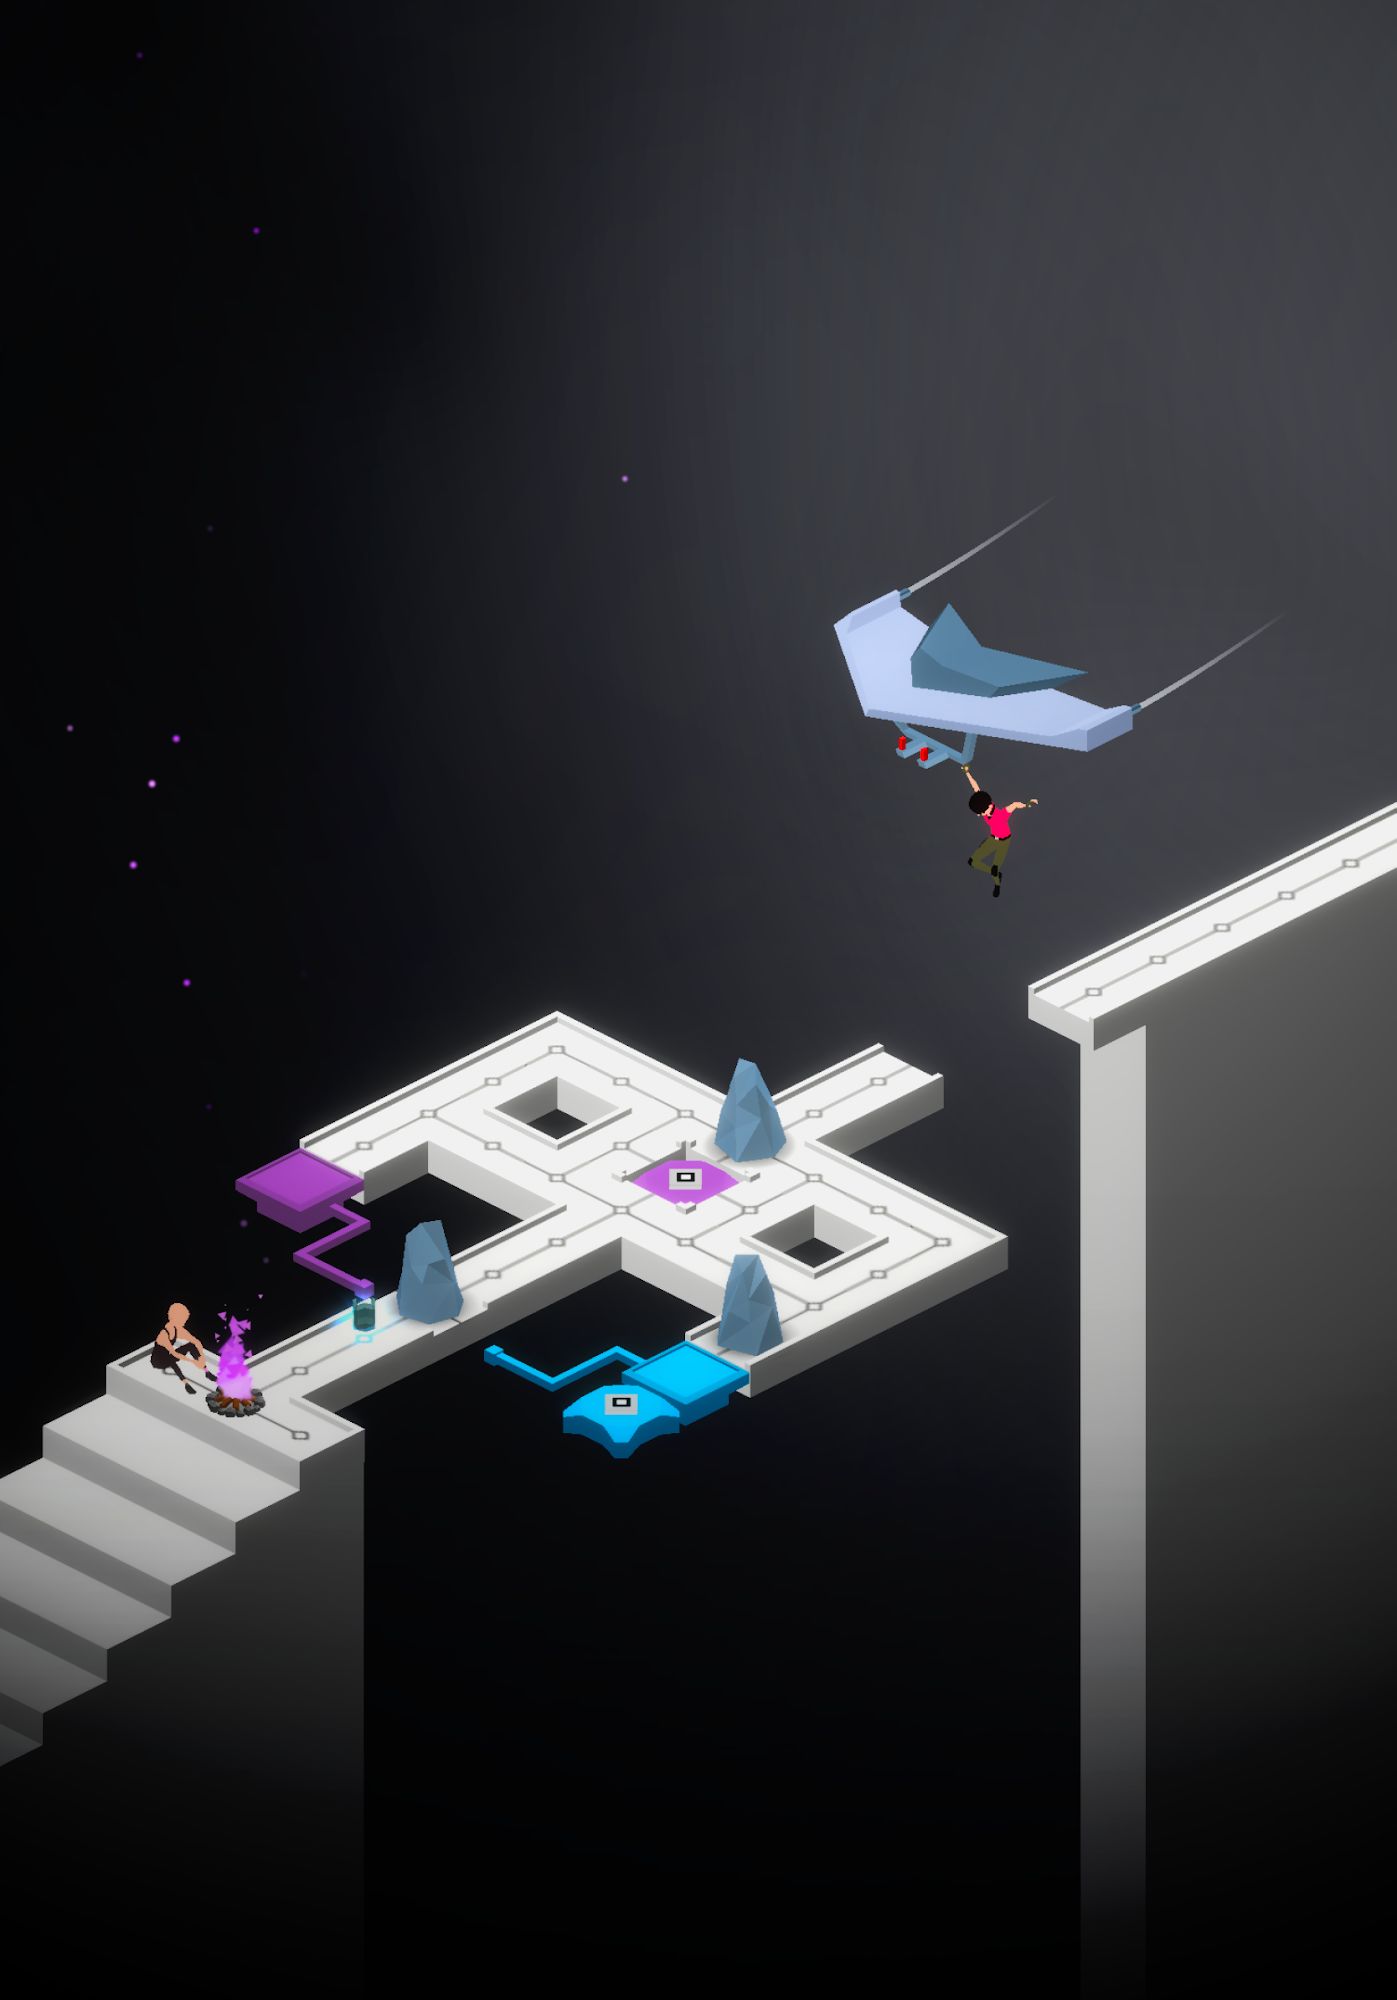 Sole Light: Isometric Puzzles - Android game screenshots.